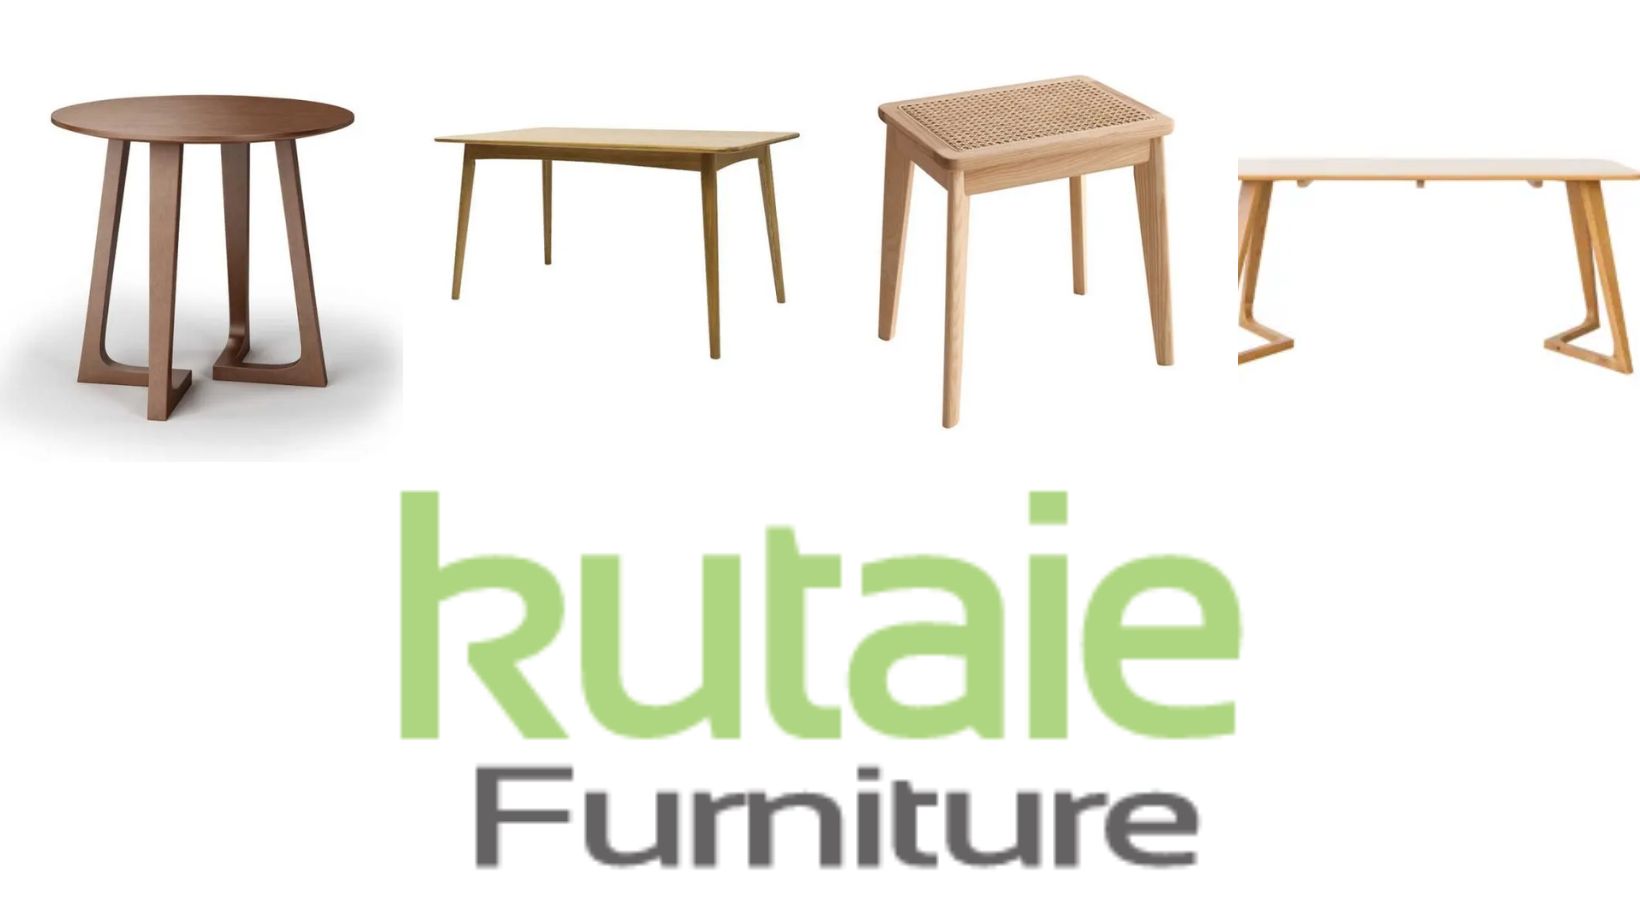 Kutaie Furniture's Trendiest Tables and Stools